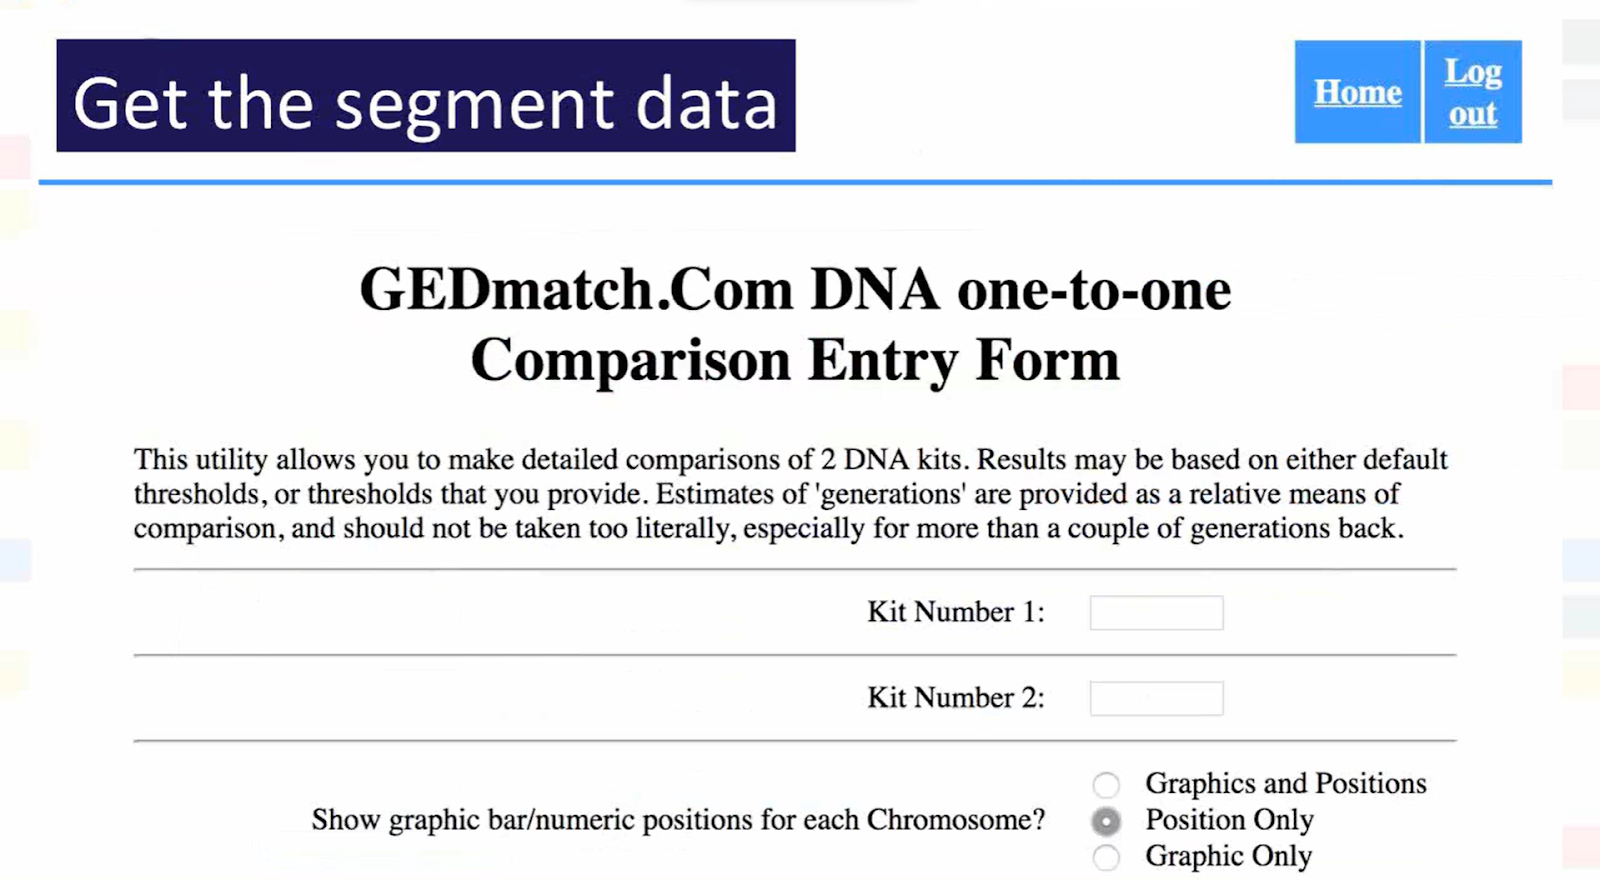 A snippet from GEDmatch website